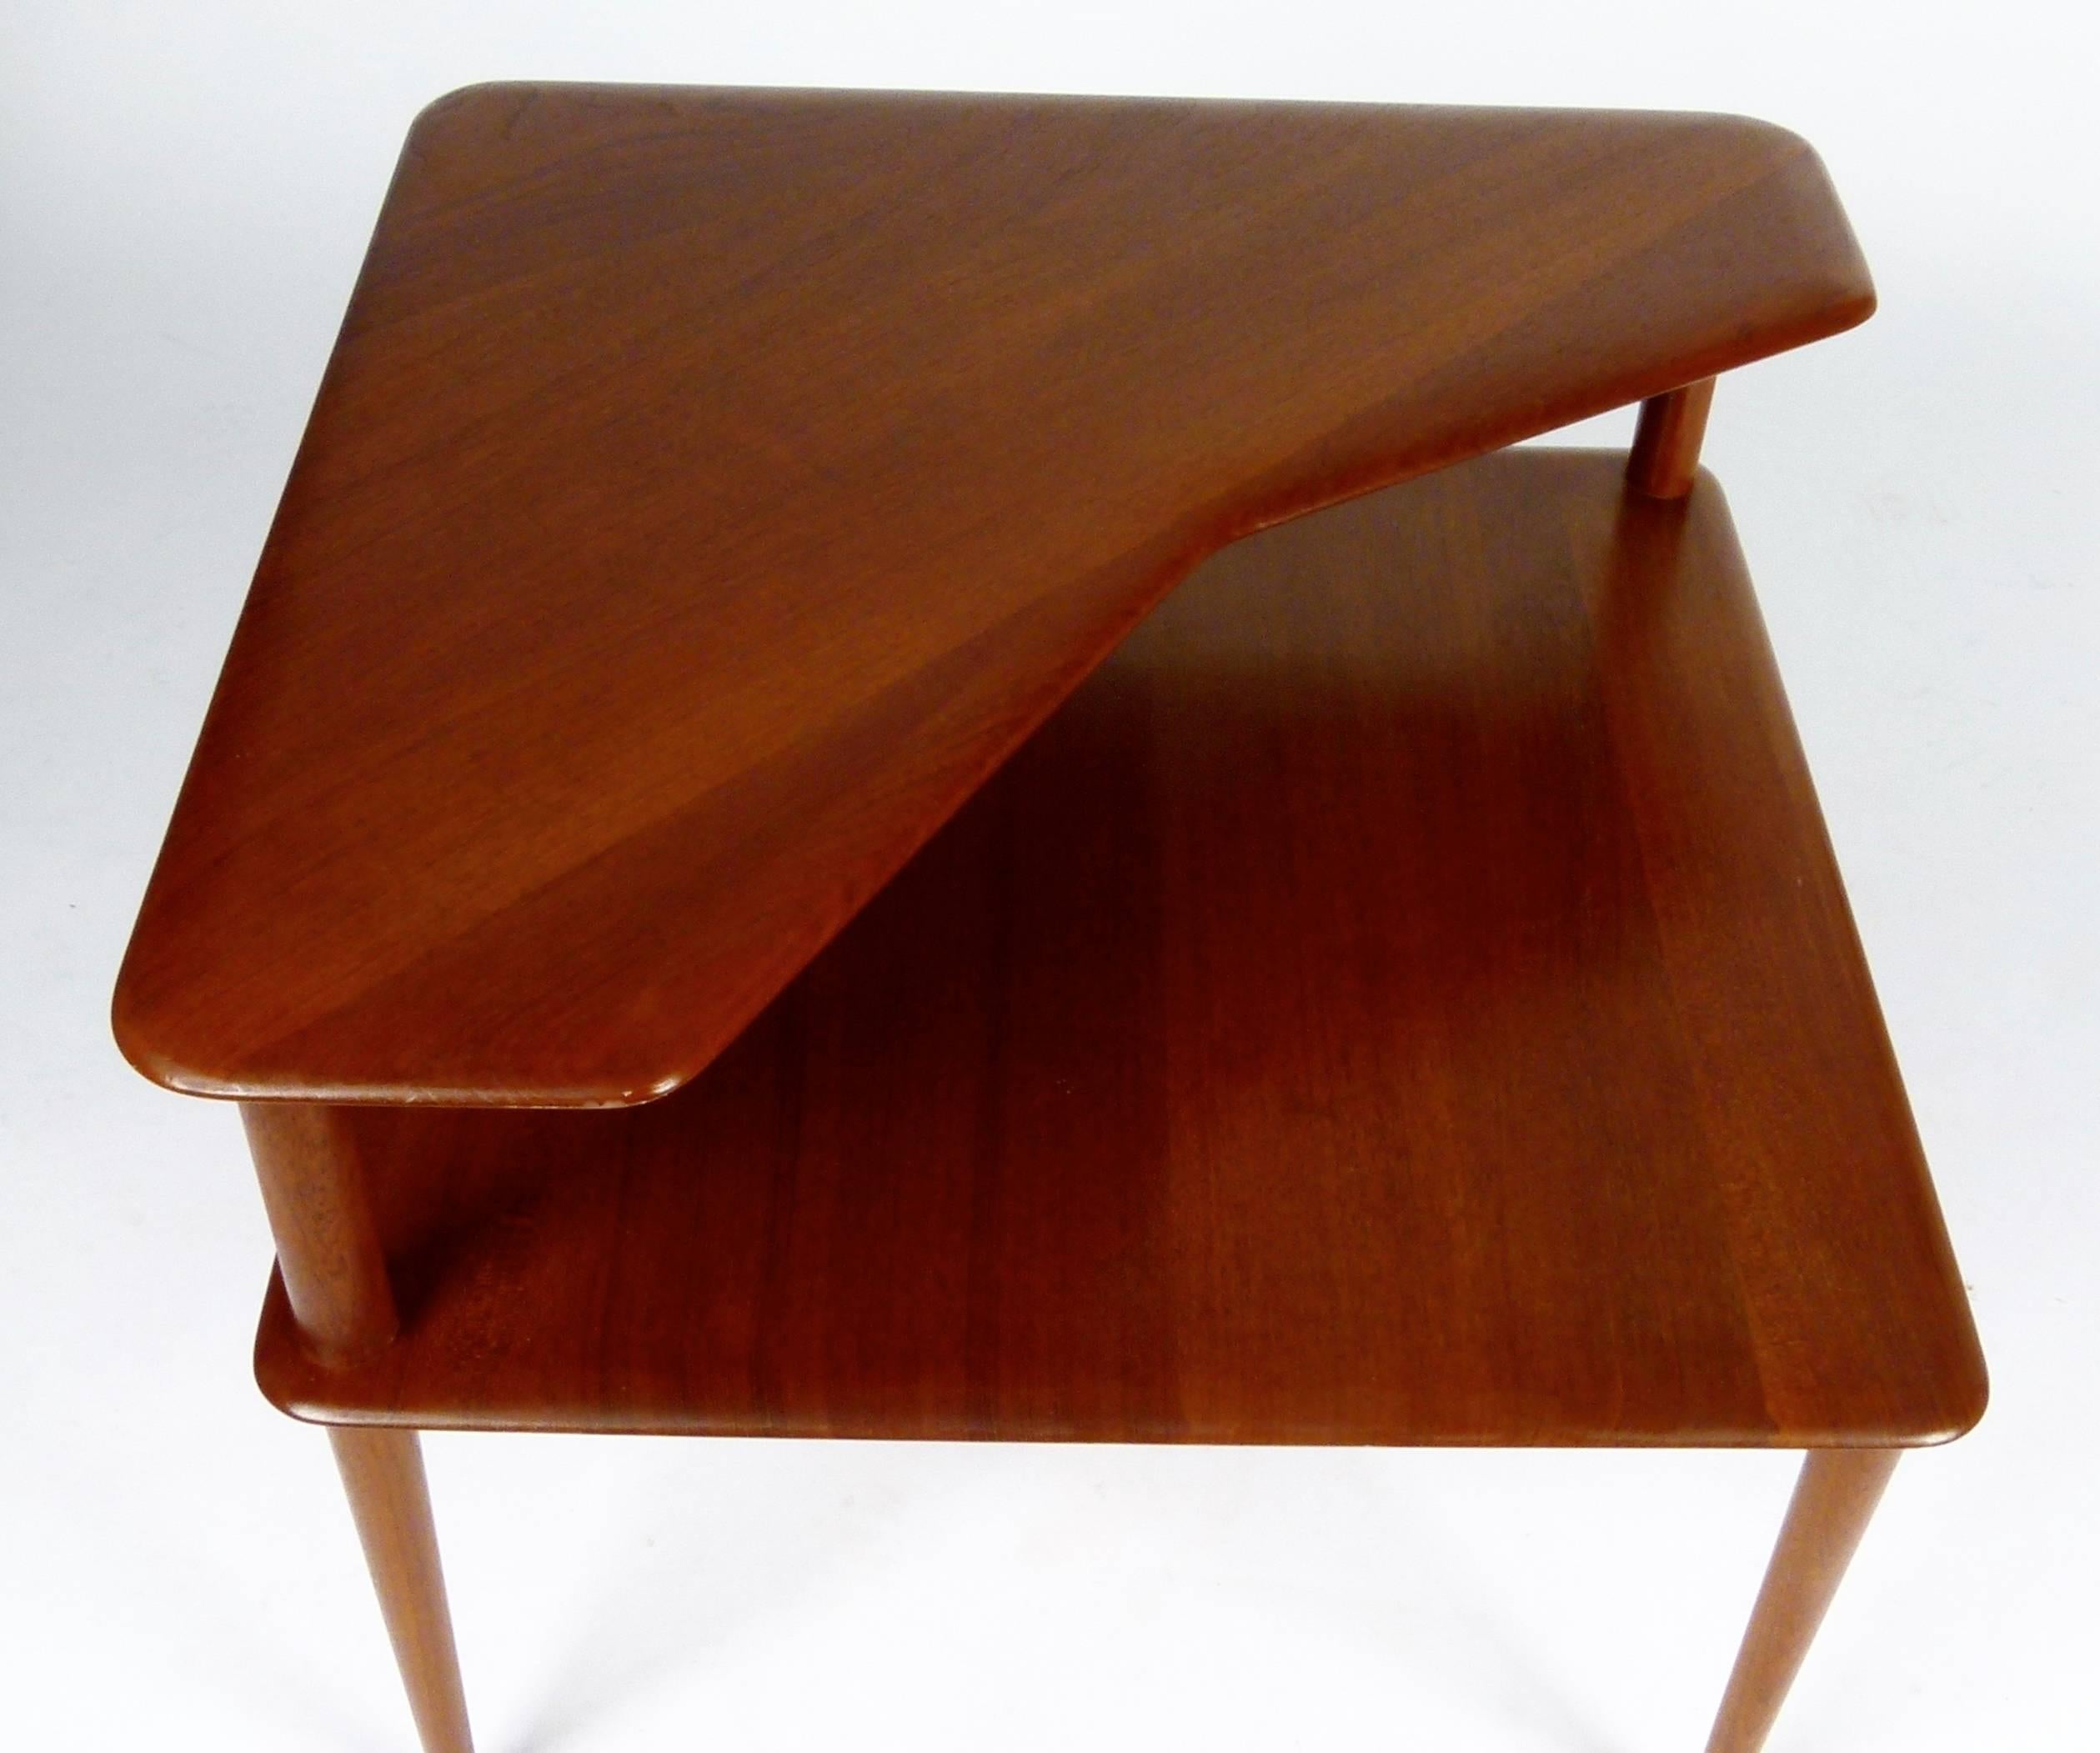 Beautiful, rare two-tier corner table in solid oiled teak designed by Peter Hvidt and Orla Molgaard-Nielsen for France & Son, Denmark, circa 1955. Excellent restored condition.